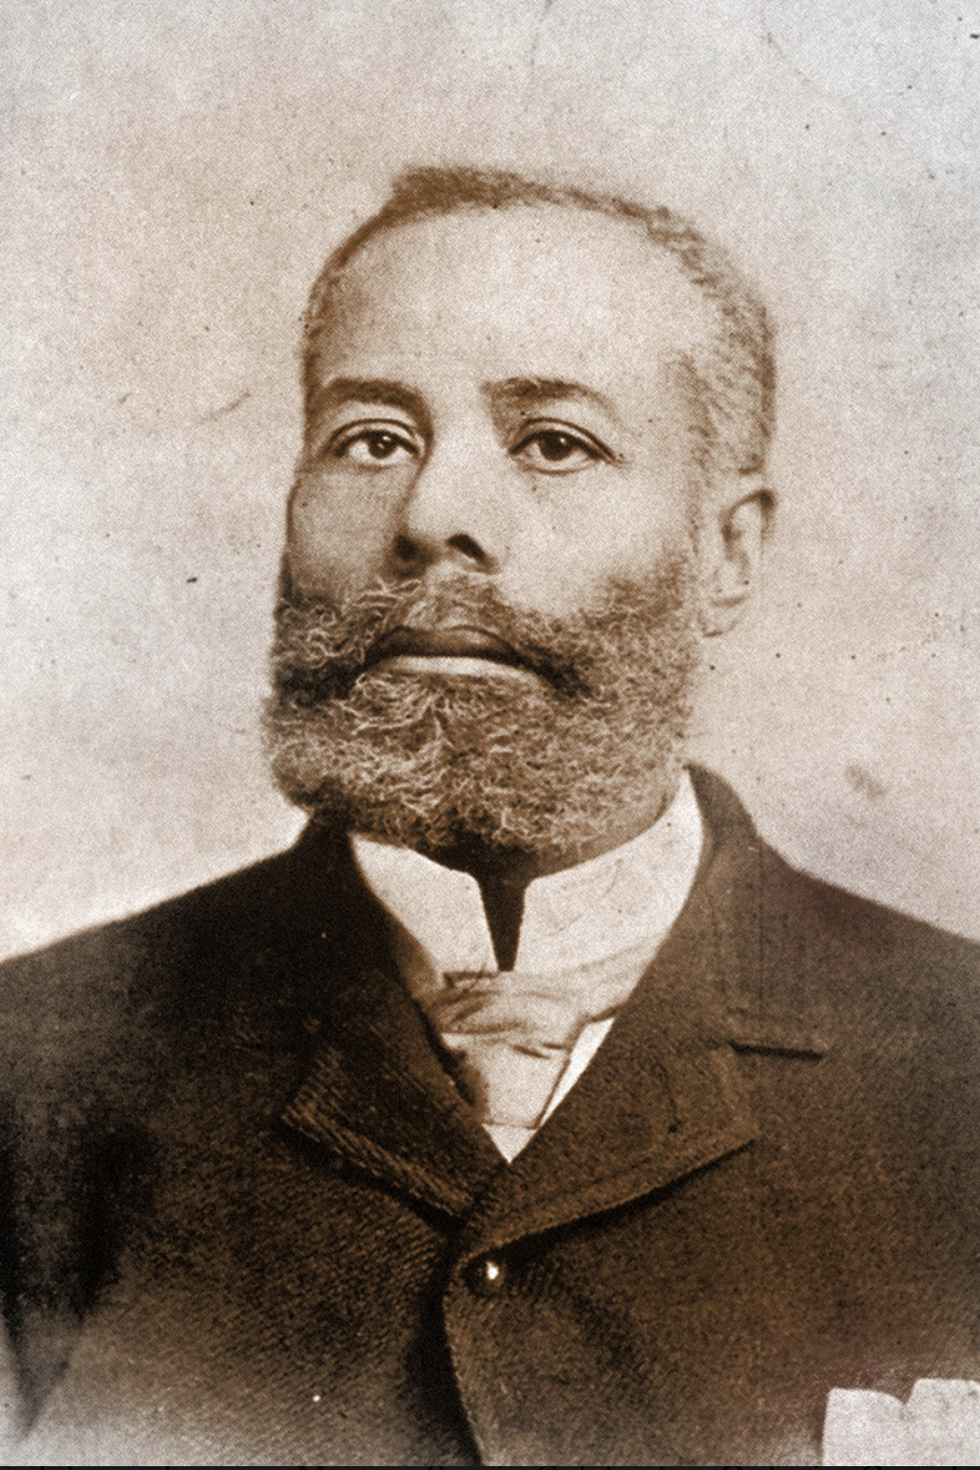 elijah mccoy looks at the camera, he wears a jacket over a collared shirt and tie and has a full beard